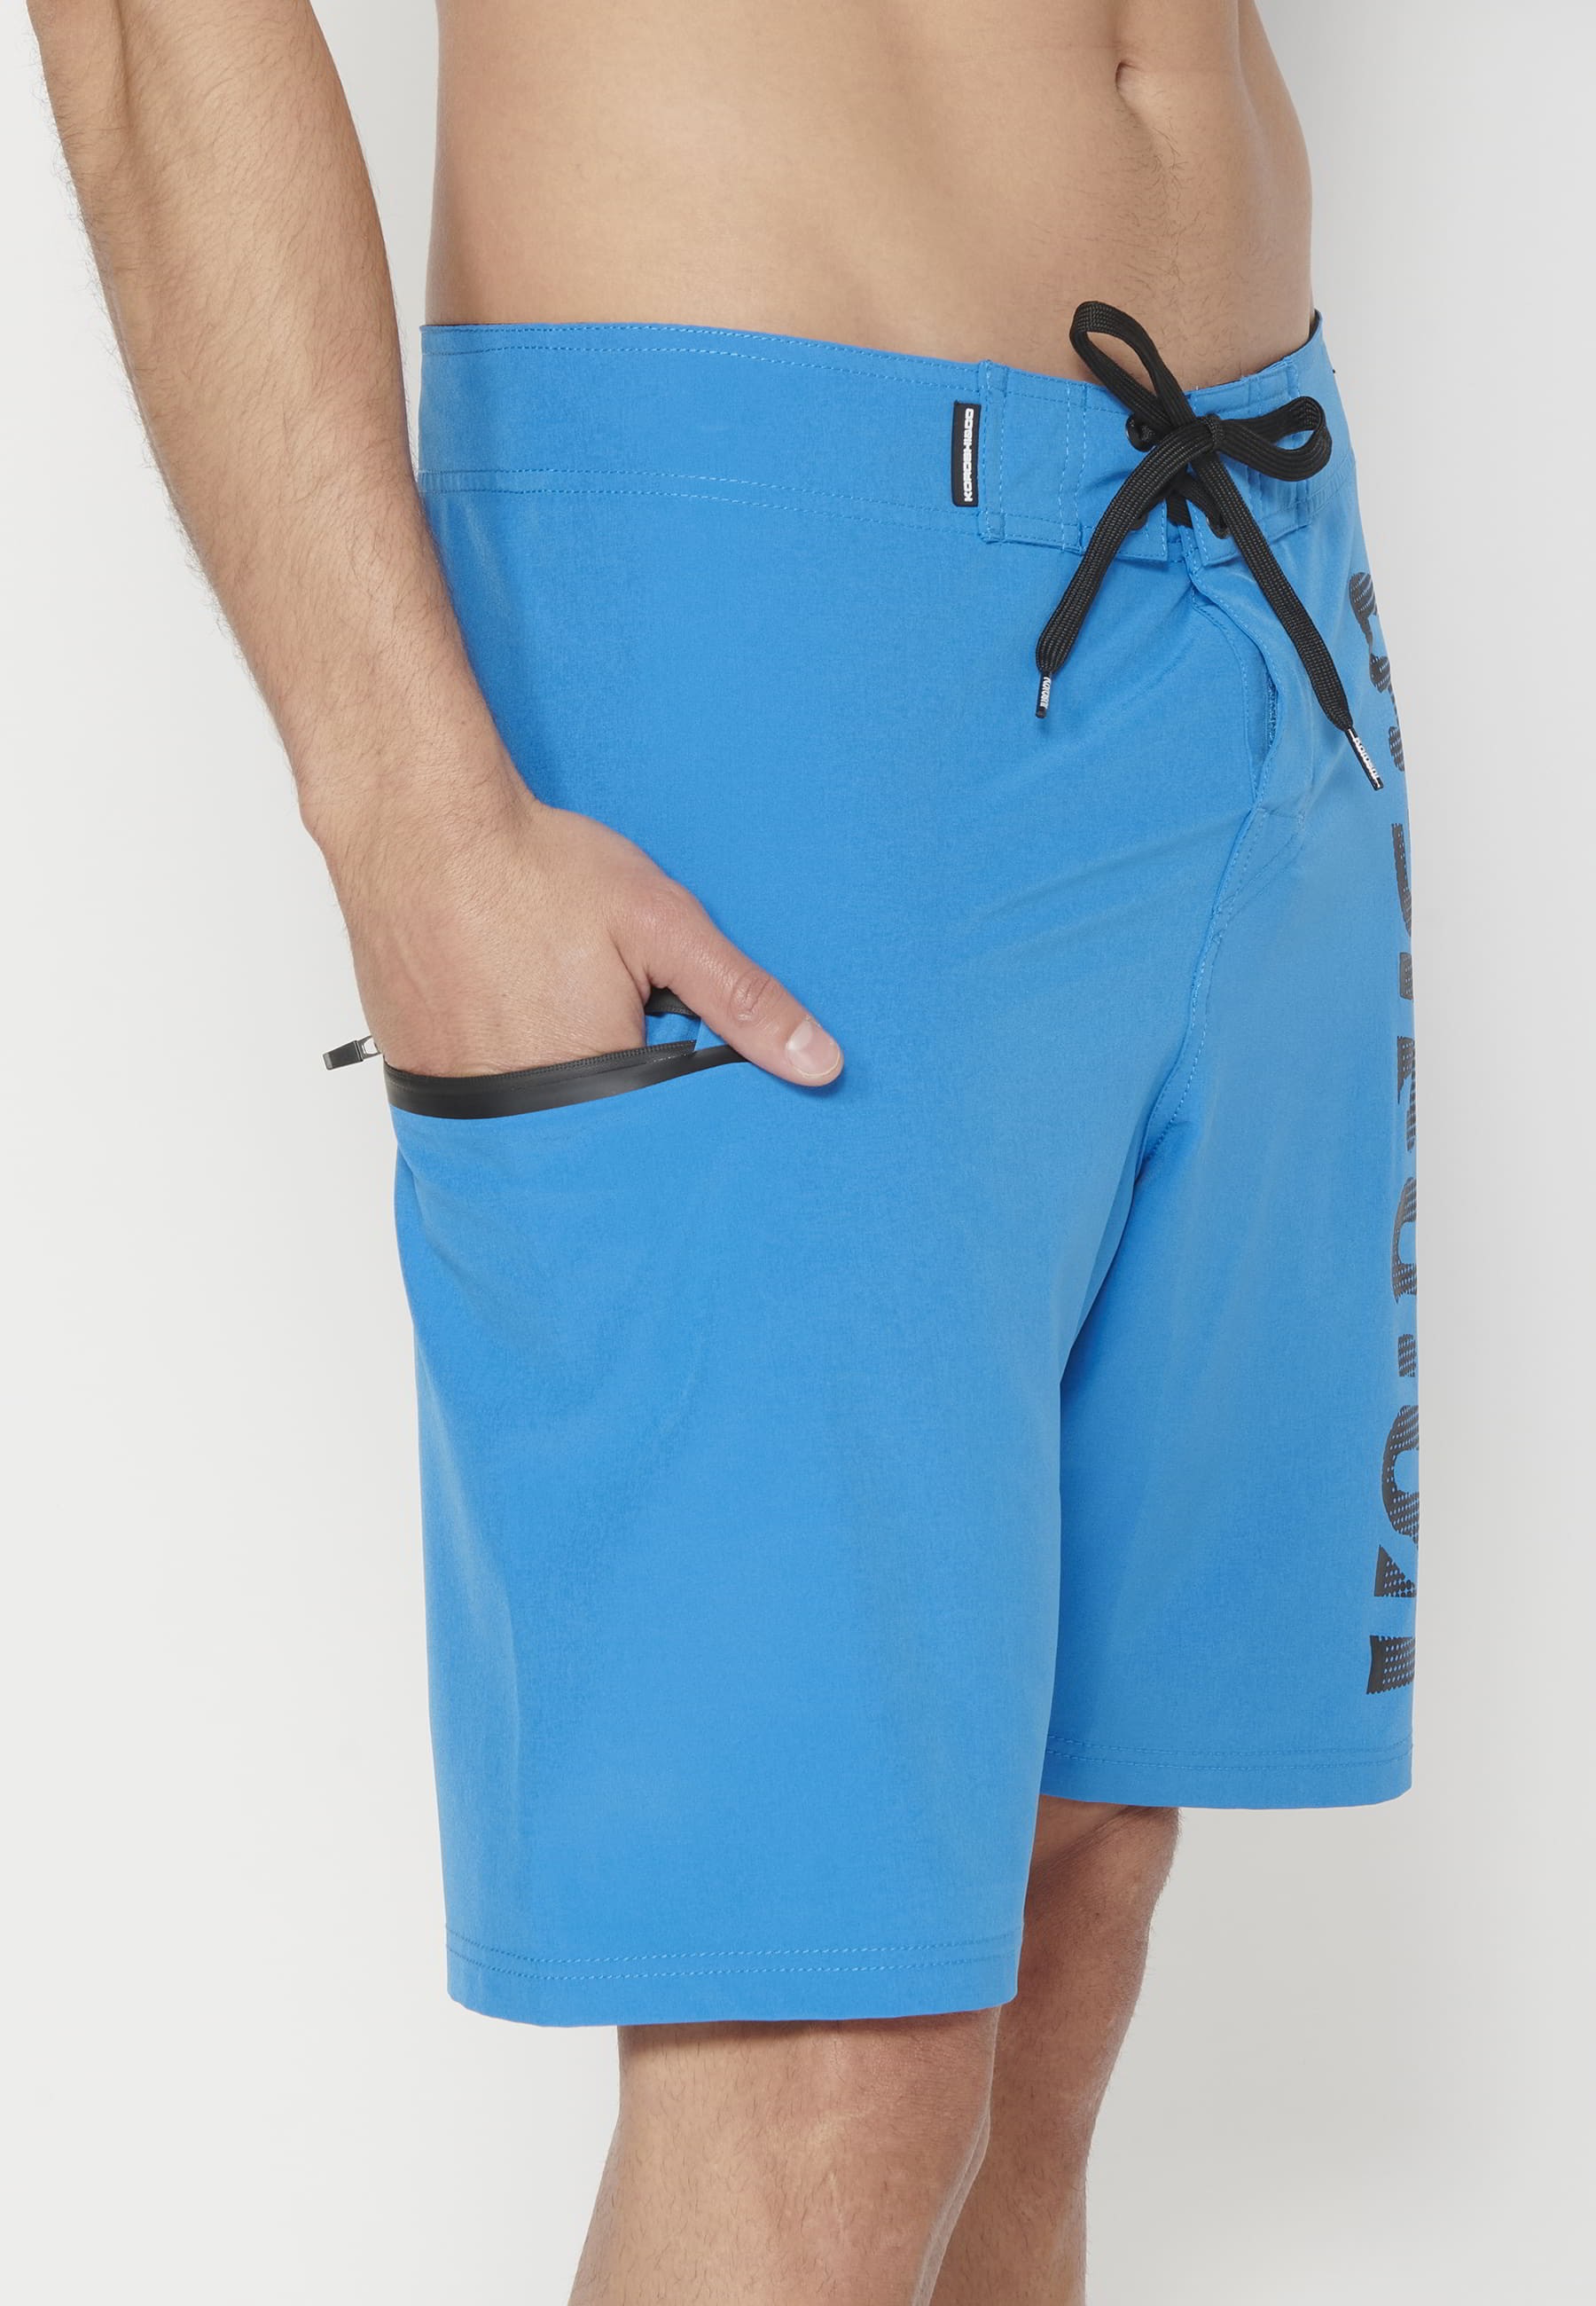 Short Surfer-style swimsuit with three Pockets in Blue color for Men